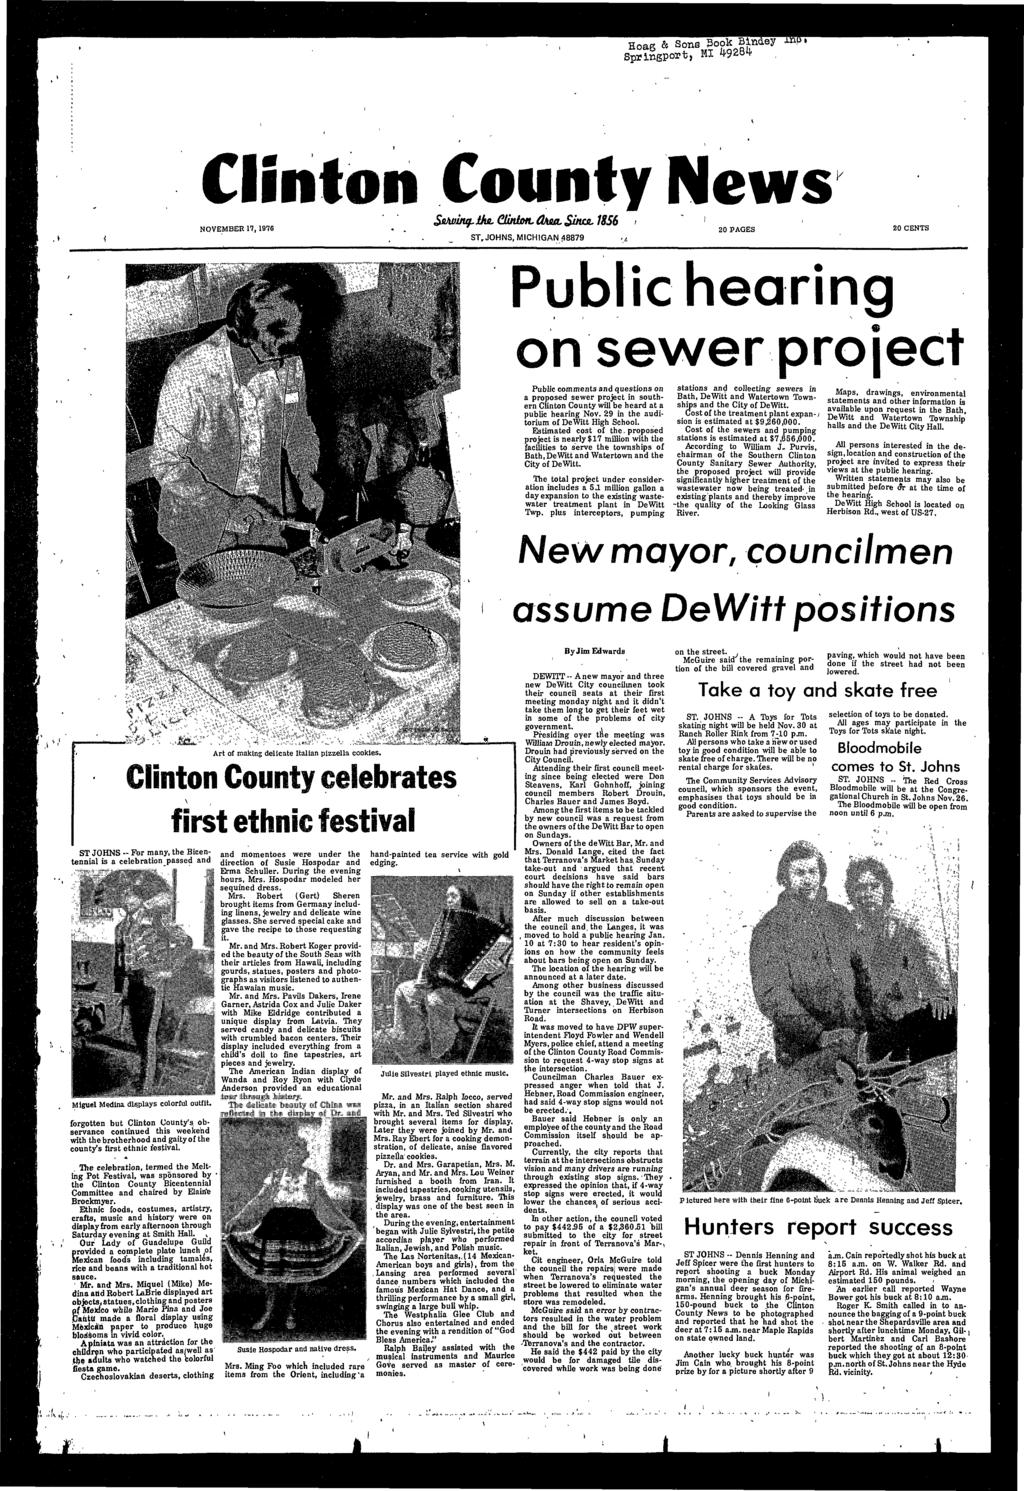 Sprngport, MI ^9^8^ t Clnton County News V NOVEMBER 17, 1976 ST, JOHNS, MICHIGAN 48879 20 PAGES 20 CENTS Publc hearng on sewer project Publc comments and questons on a proposed sewer project n